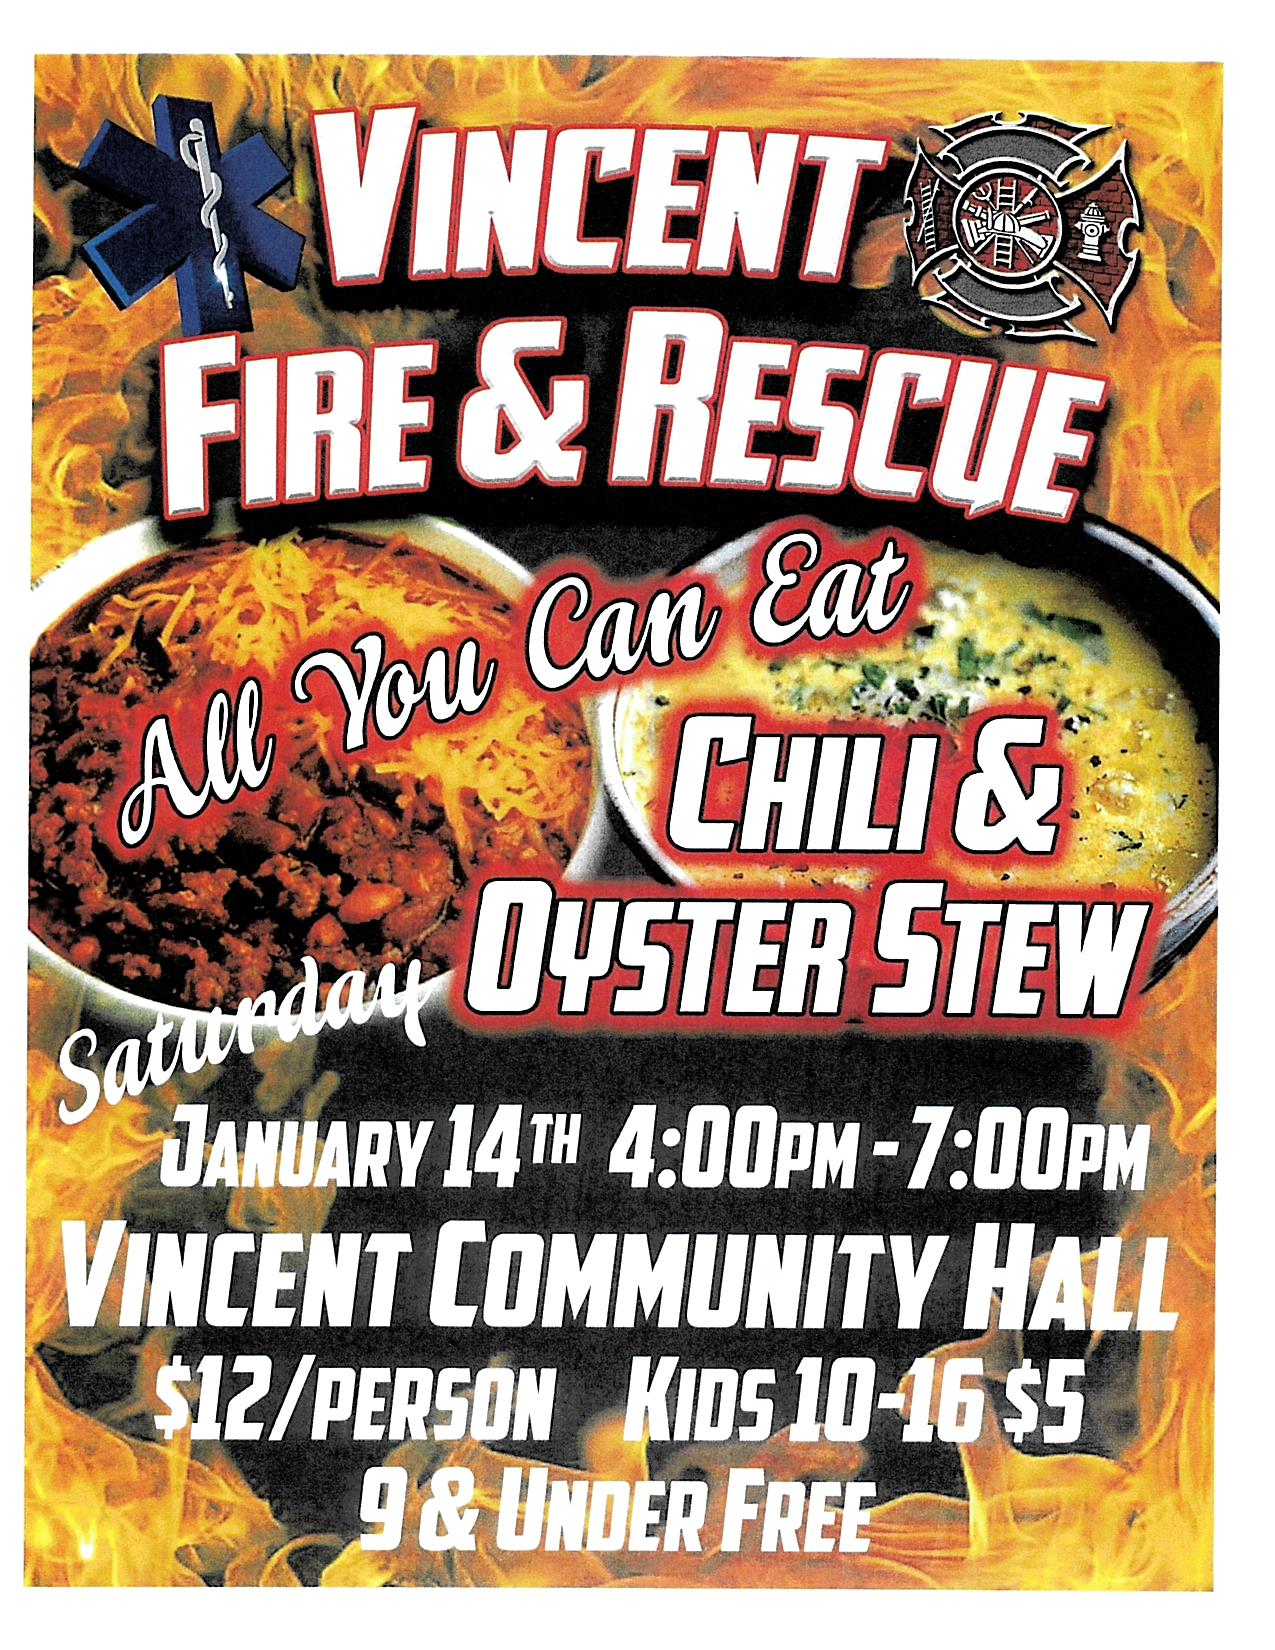 <h1 class="tribe-events-single-event-title">Vincent Fire and Rescue All You Can Eat Chili and Oyster Stew</h1>